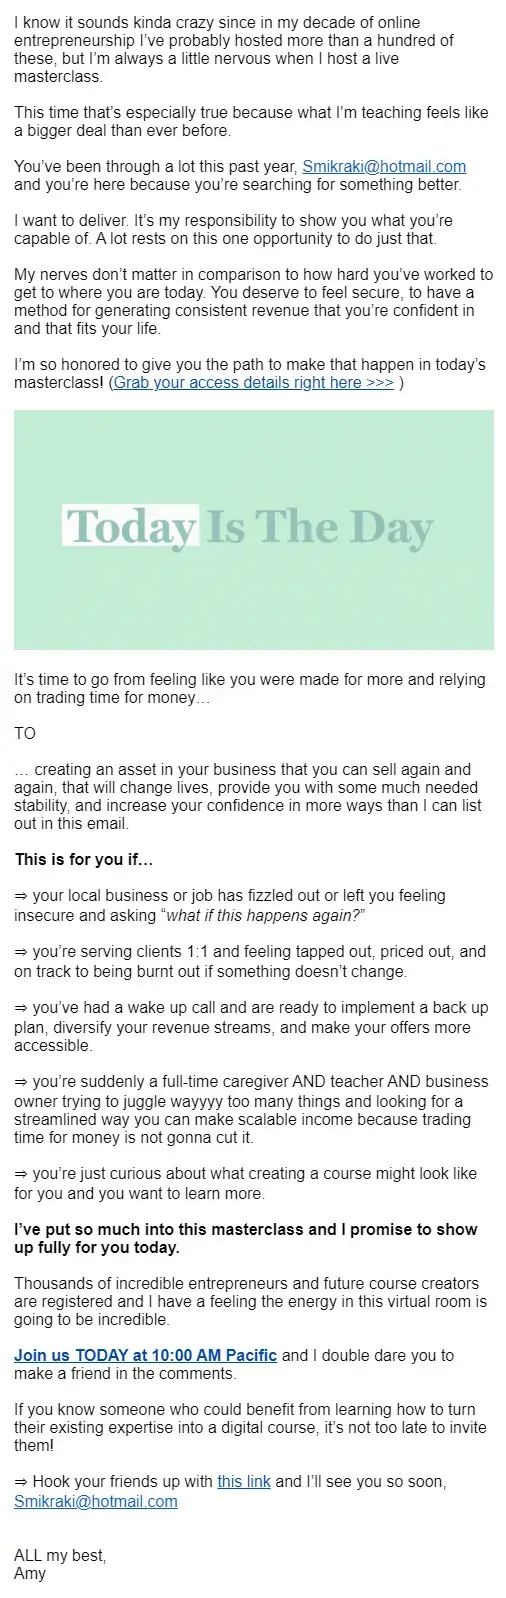 A screenshot showing Amy Porterfield's fifth pre-masterclass email.